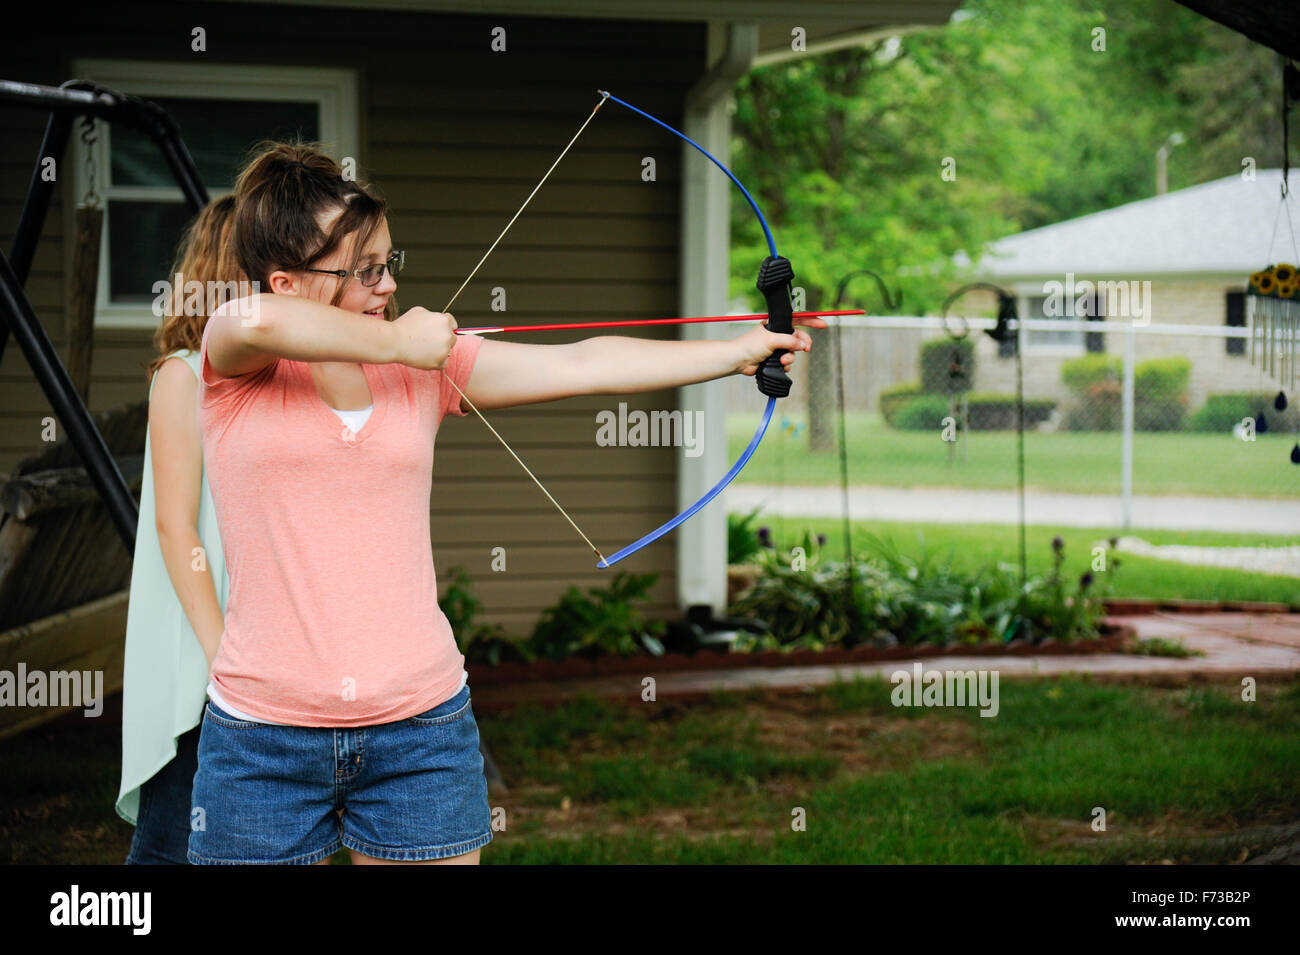 Pre-teen girl with bow and arrow in back yard Stock Photo